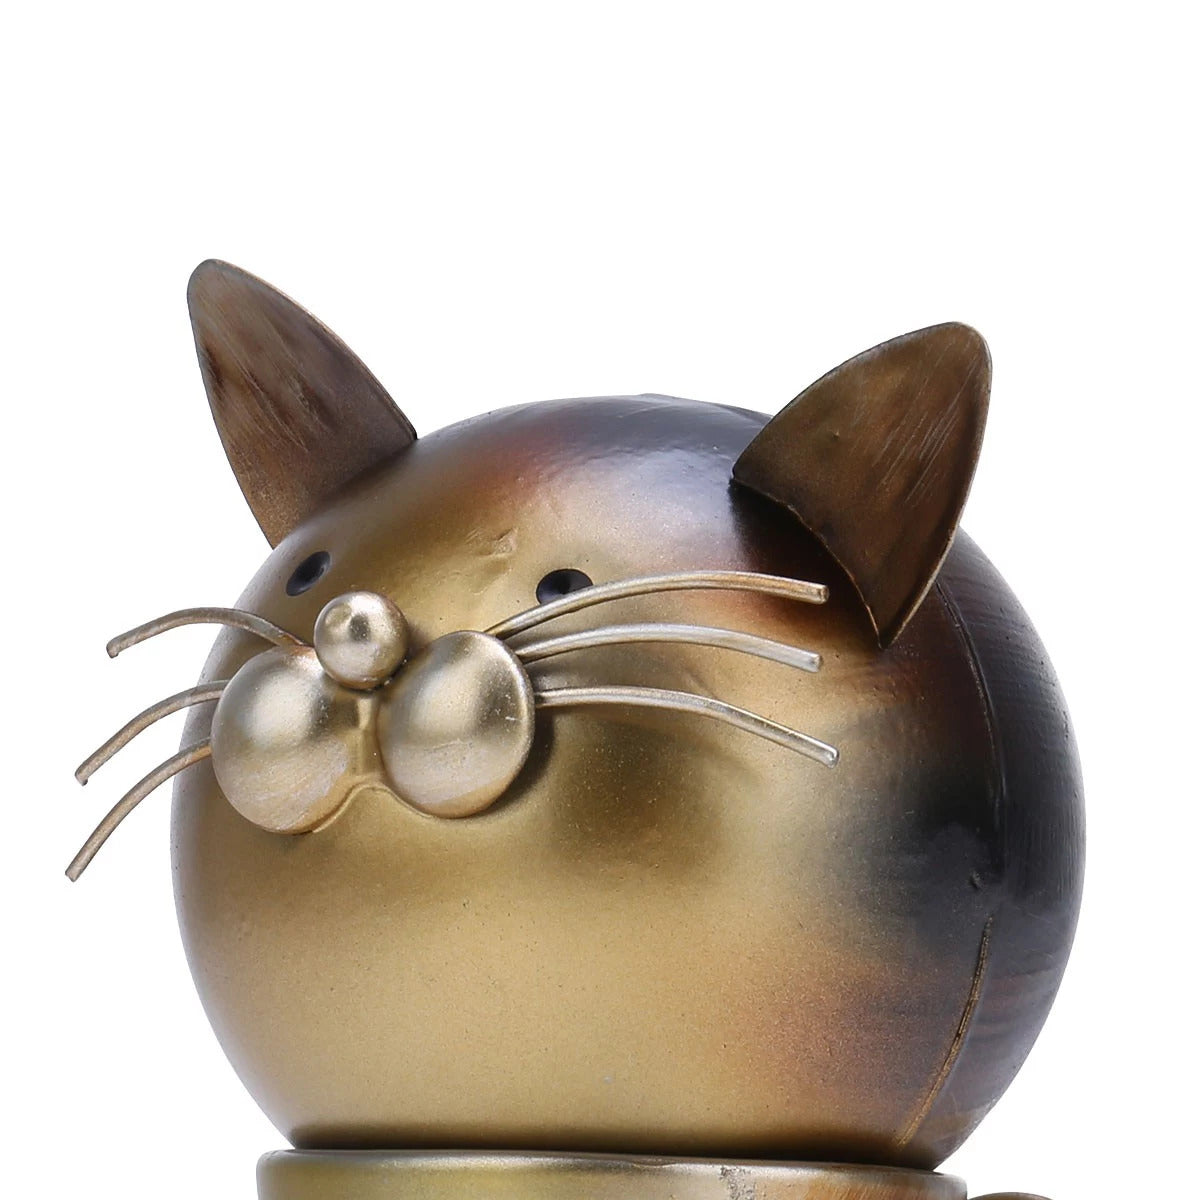 Cat Ornaments & Unique Gifts For Cat Lovers at Christmas Home Decor